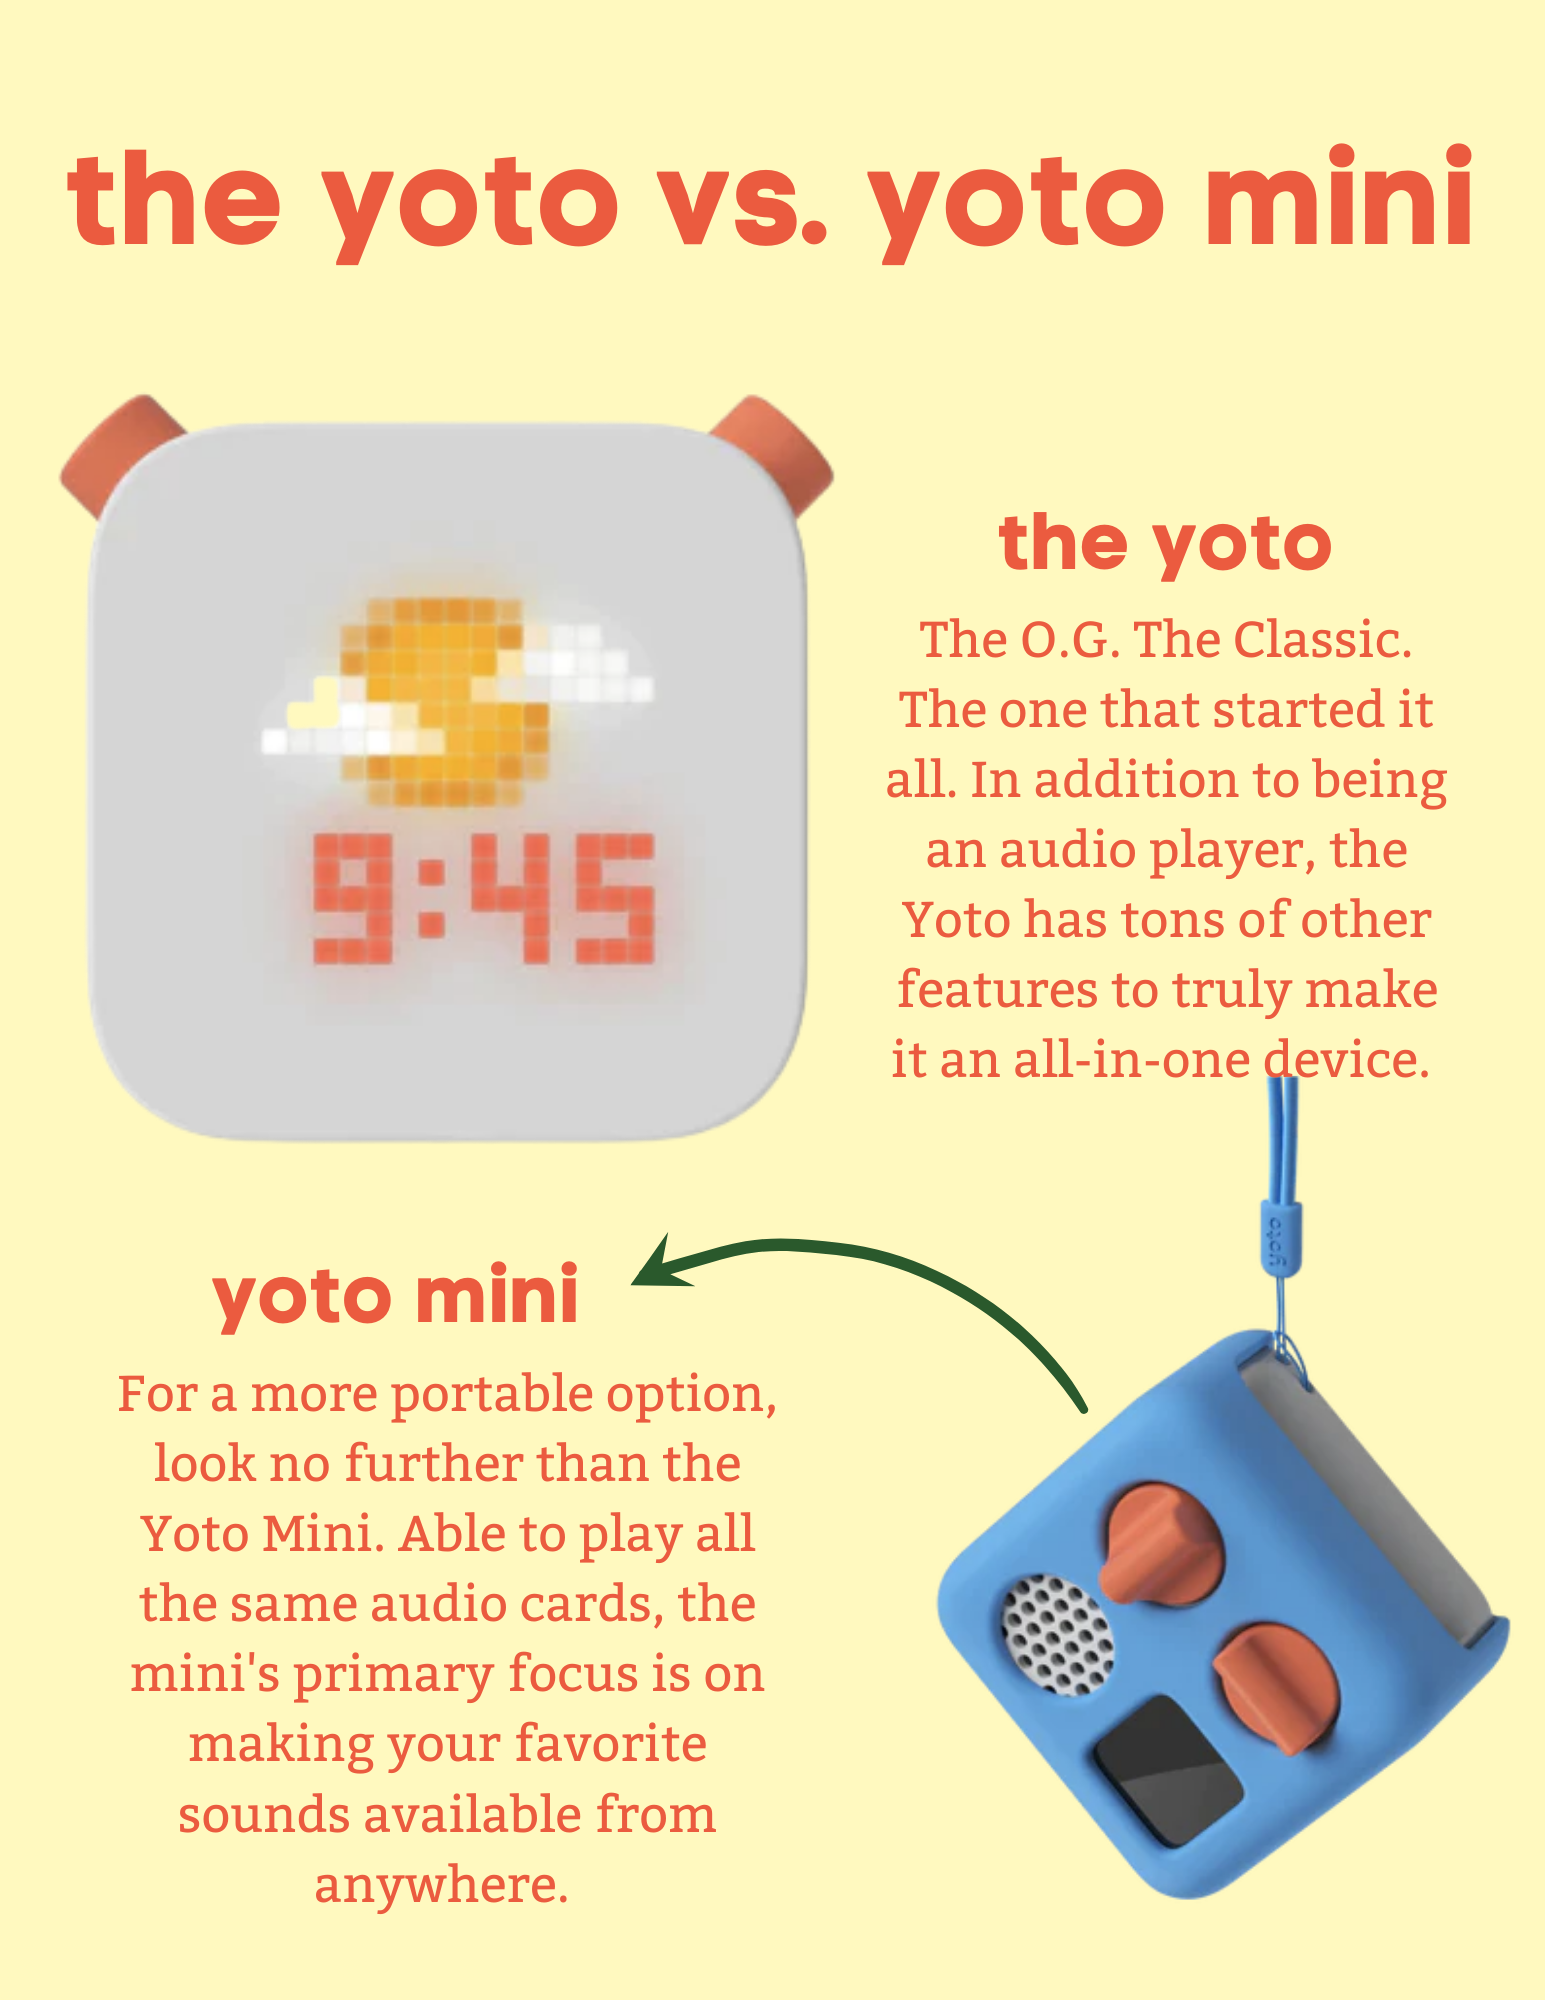 "The Yoto vs. Yoto Mini." The Yoto is the larger option that comes with more features. The Yoto Mini is easier to transport but doesn't have as many features. 